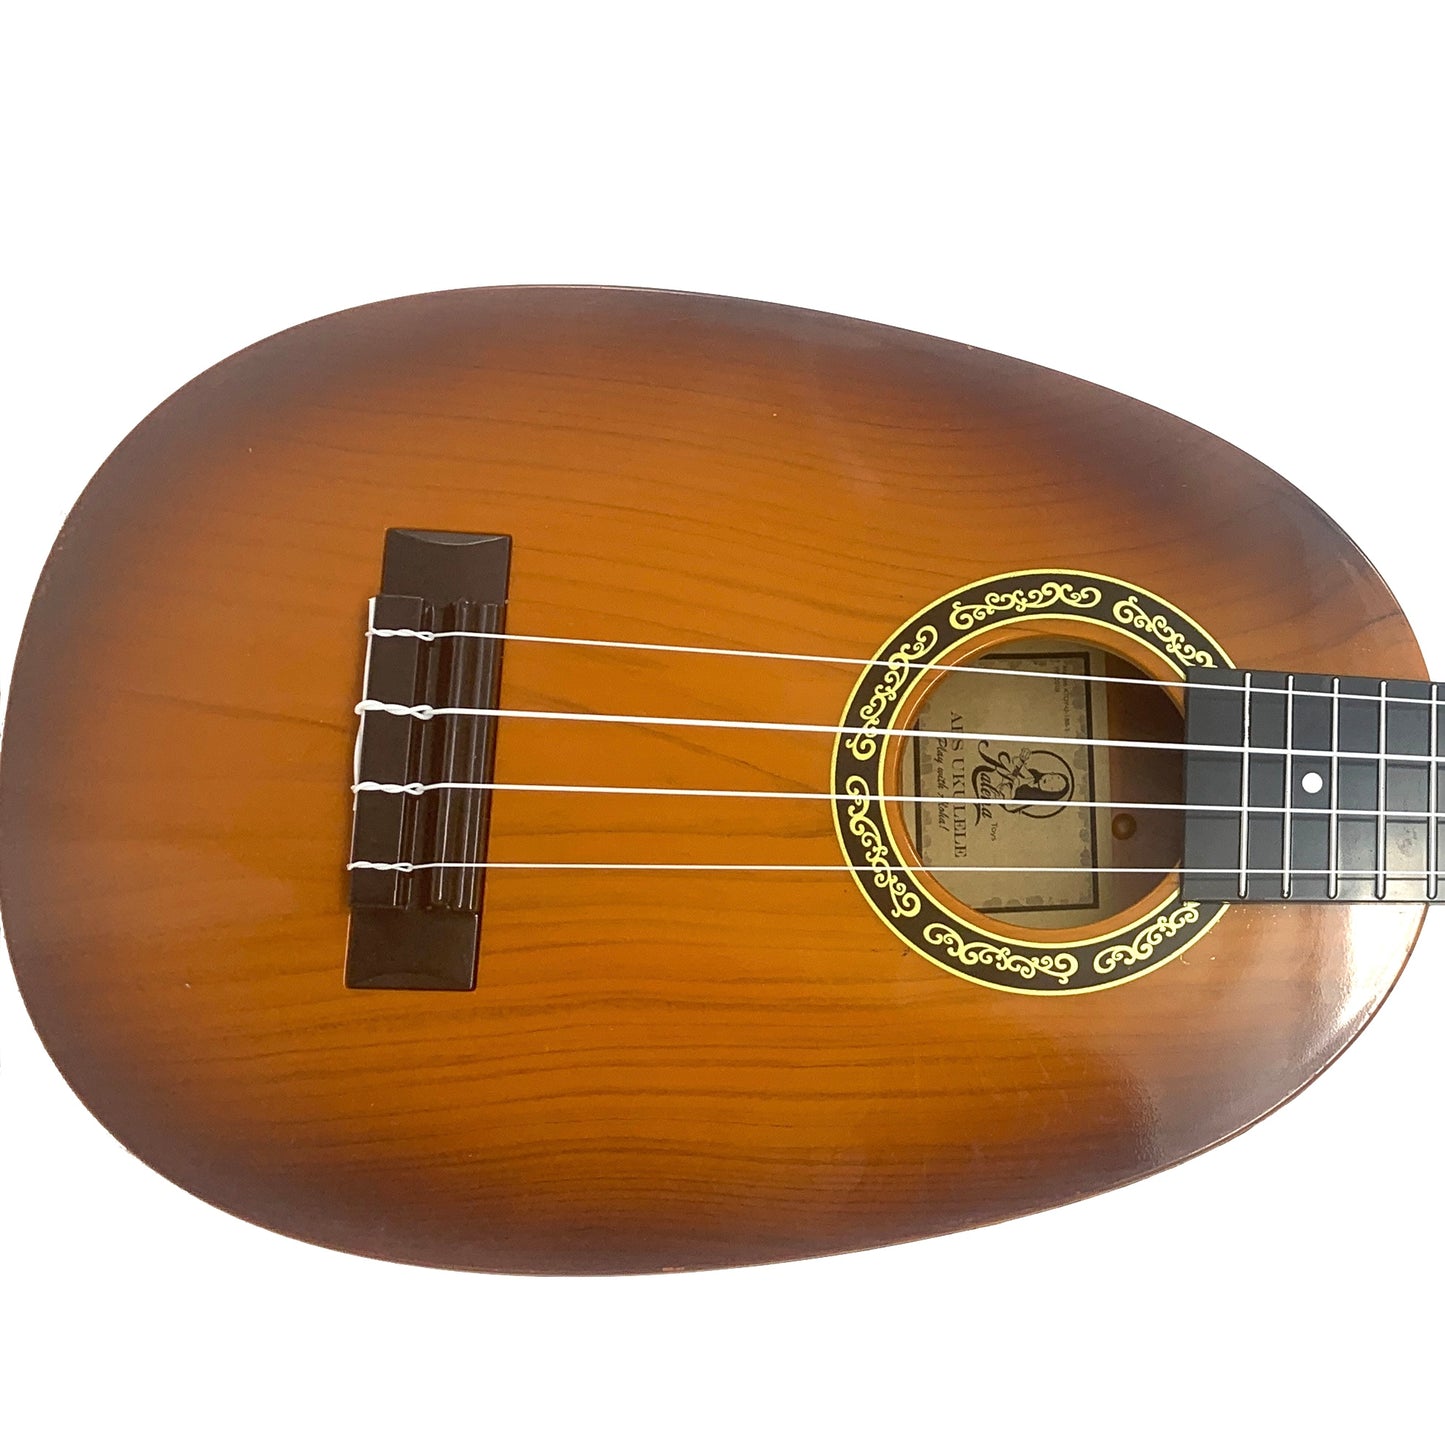 Kalena ABS Pineapple 23” Concert Ukulele with padded case - Kalena Instruments / Rosewood ABS